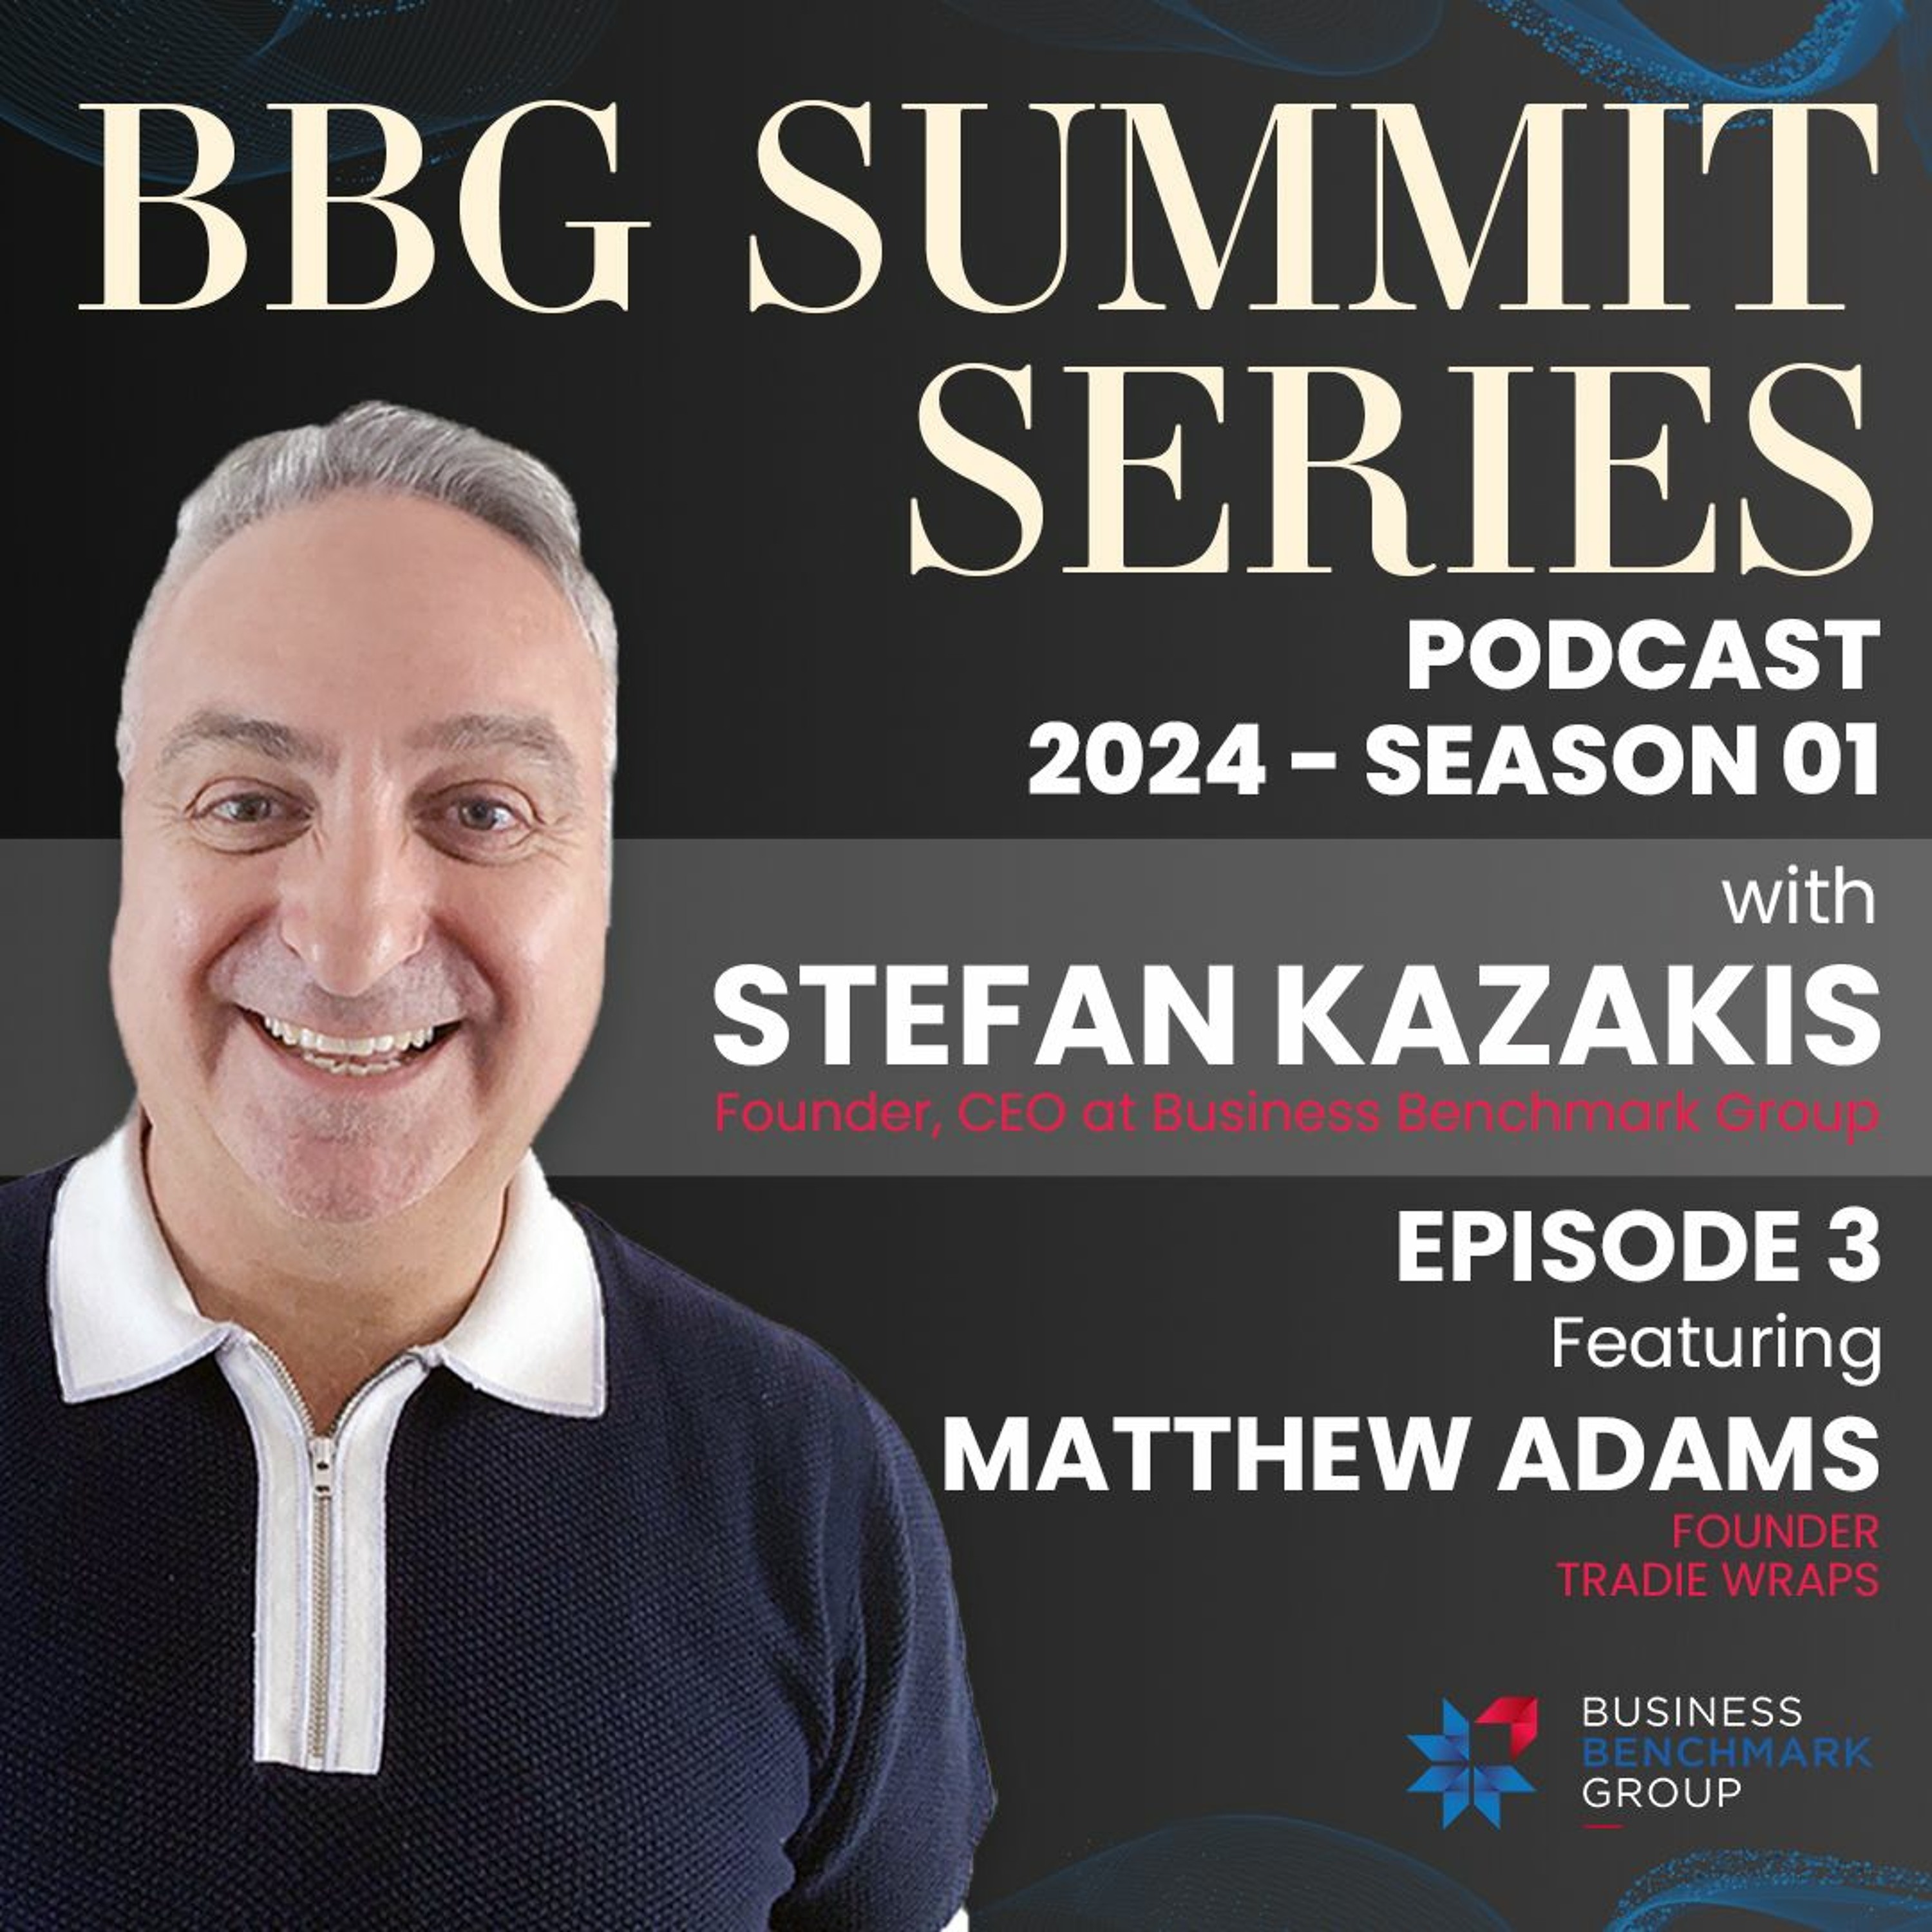 S1E3 - The tools that set you and your business up for success with Matthew Adams